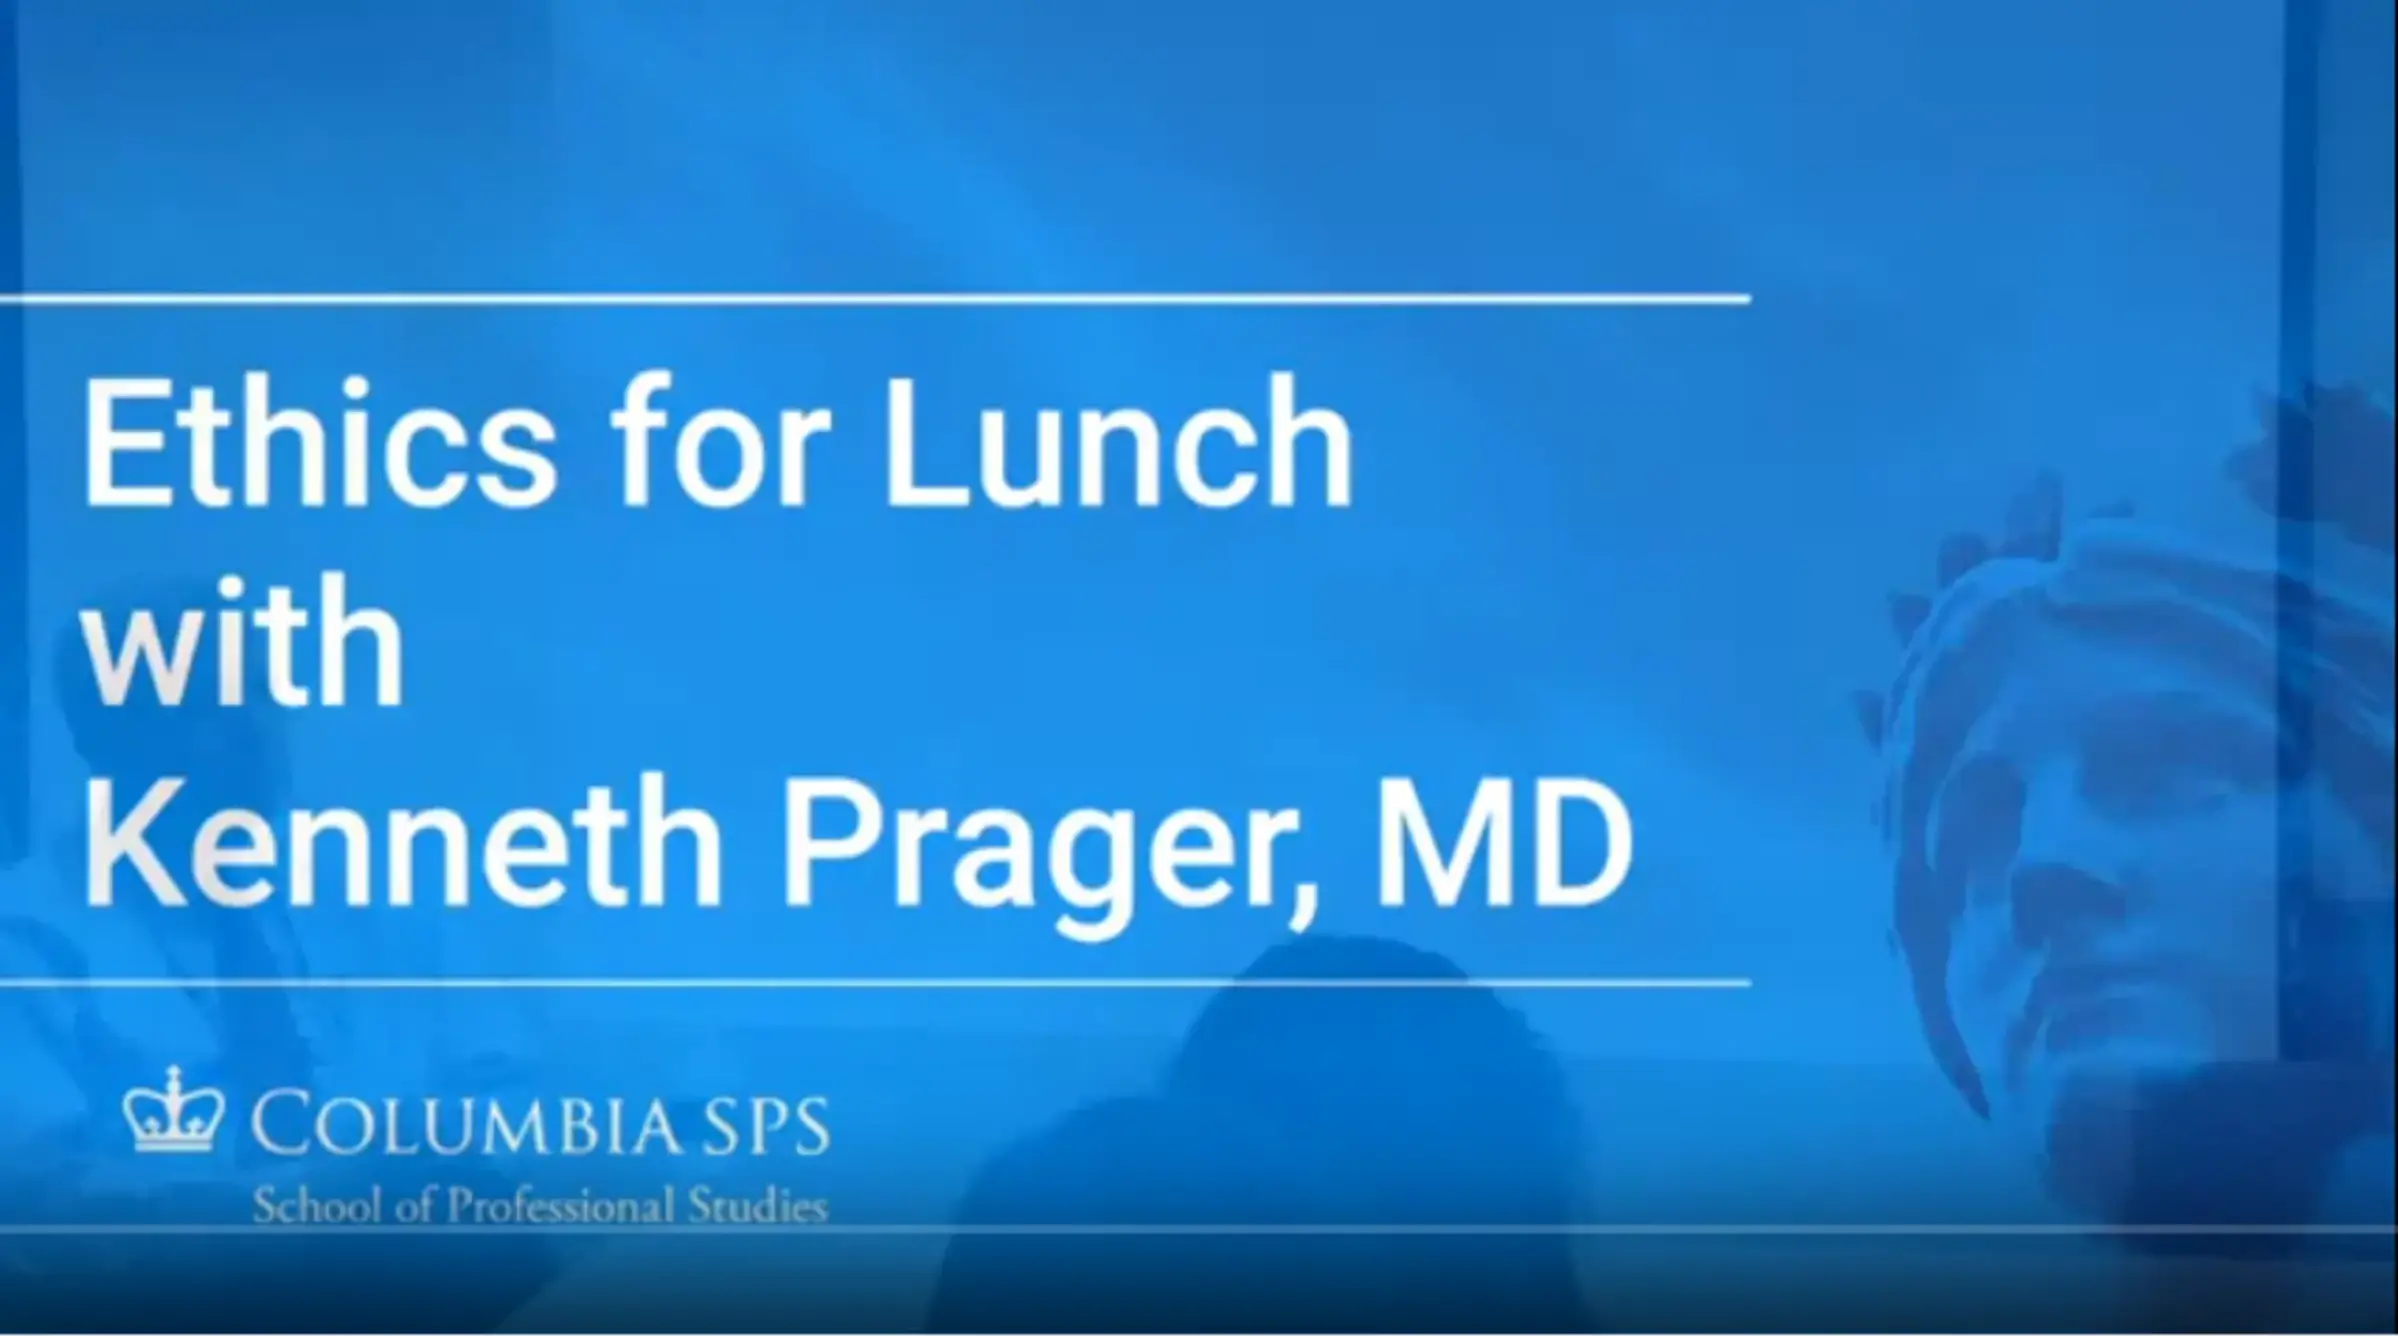 Ethics for Lunch with Kenneth Prager, MD